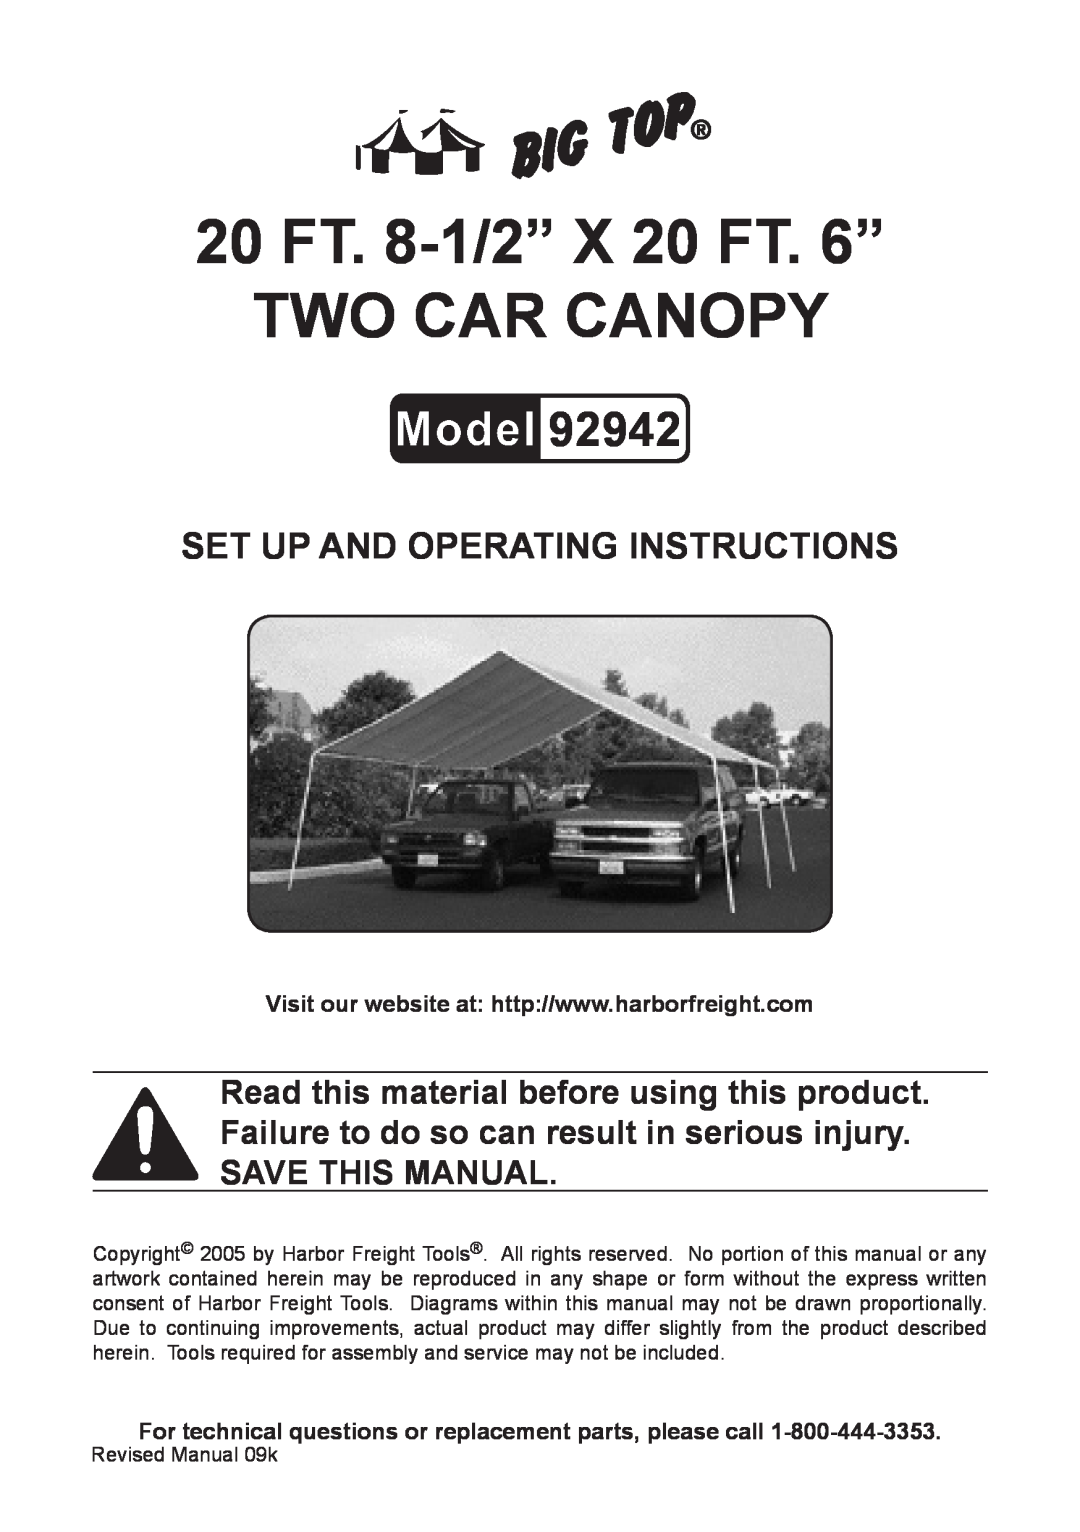 Harbor Freight Tools 92942 manual 20 Ft. 8-1/2”x 20 Ft. 6” two car canopy, Set up And Operating Instructions 